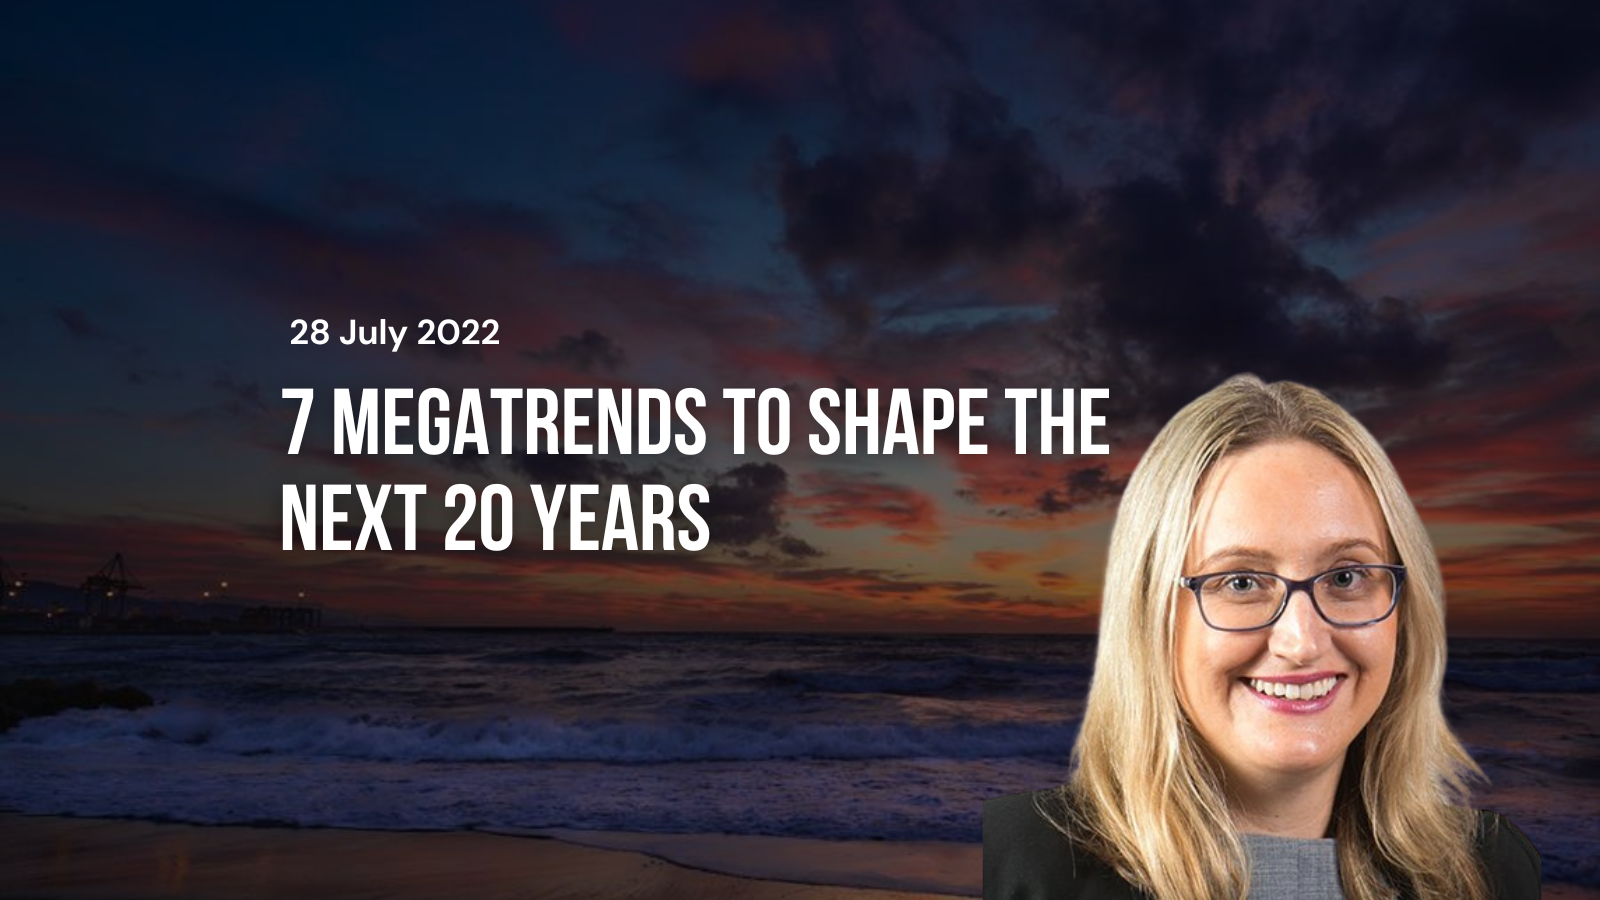 Seven megatrends that will shape the next 20 years